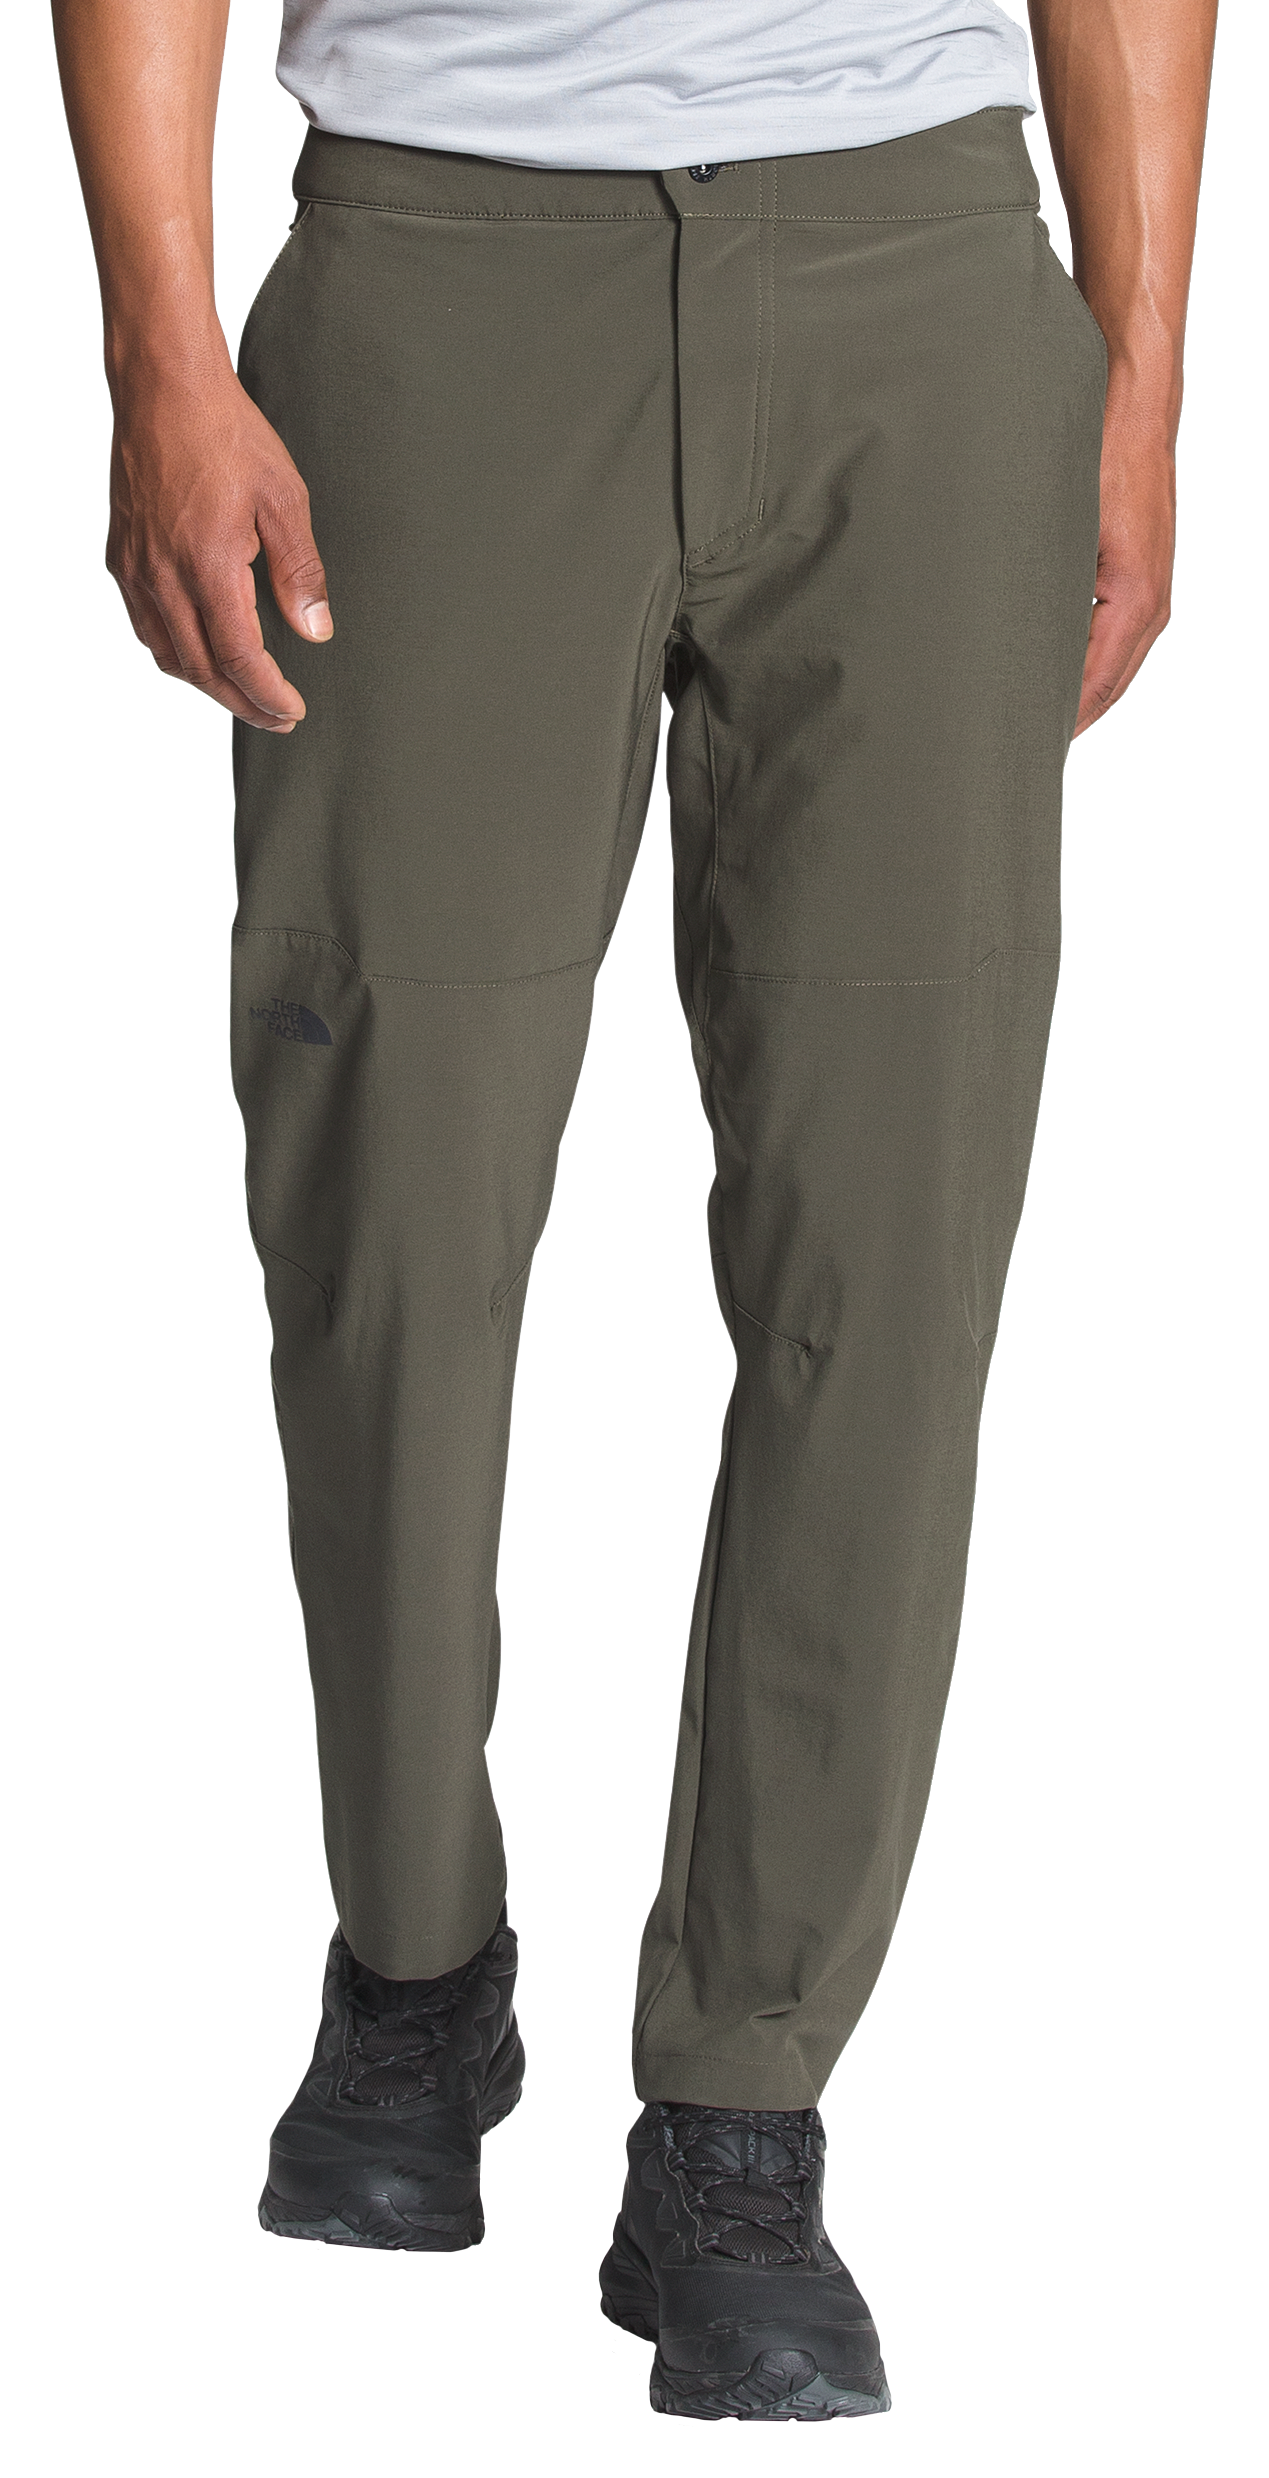 The North Face Paramount Active Pants for Men - New Taupe Green/New Taupe Green - 31 - Regular